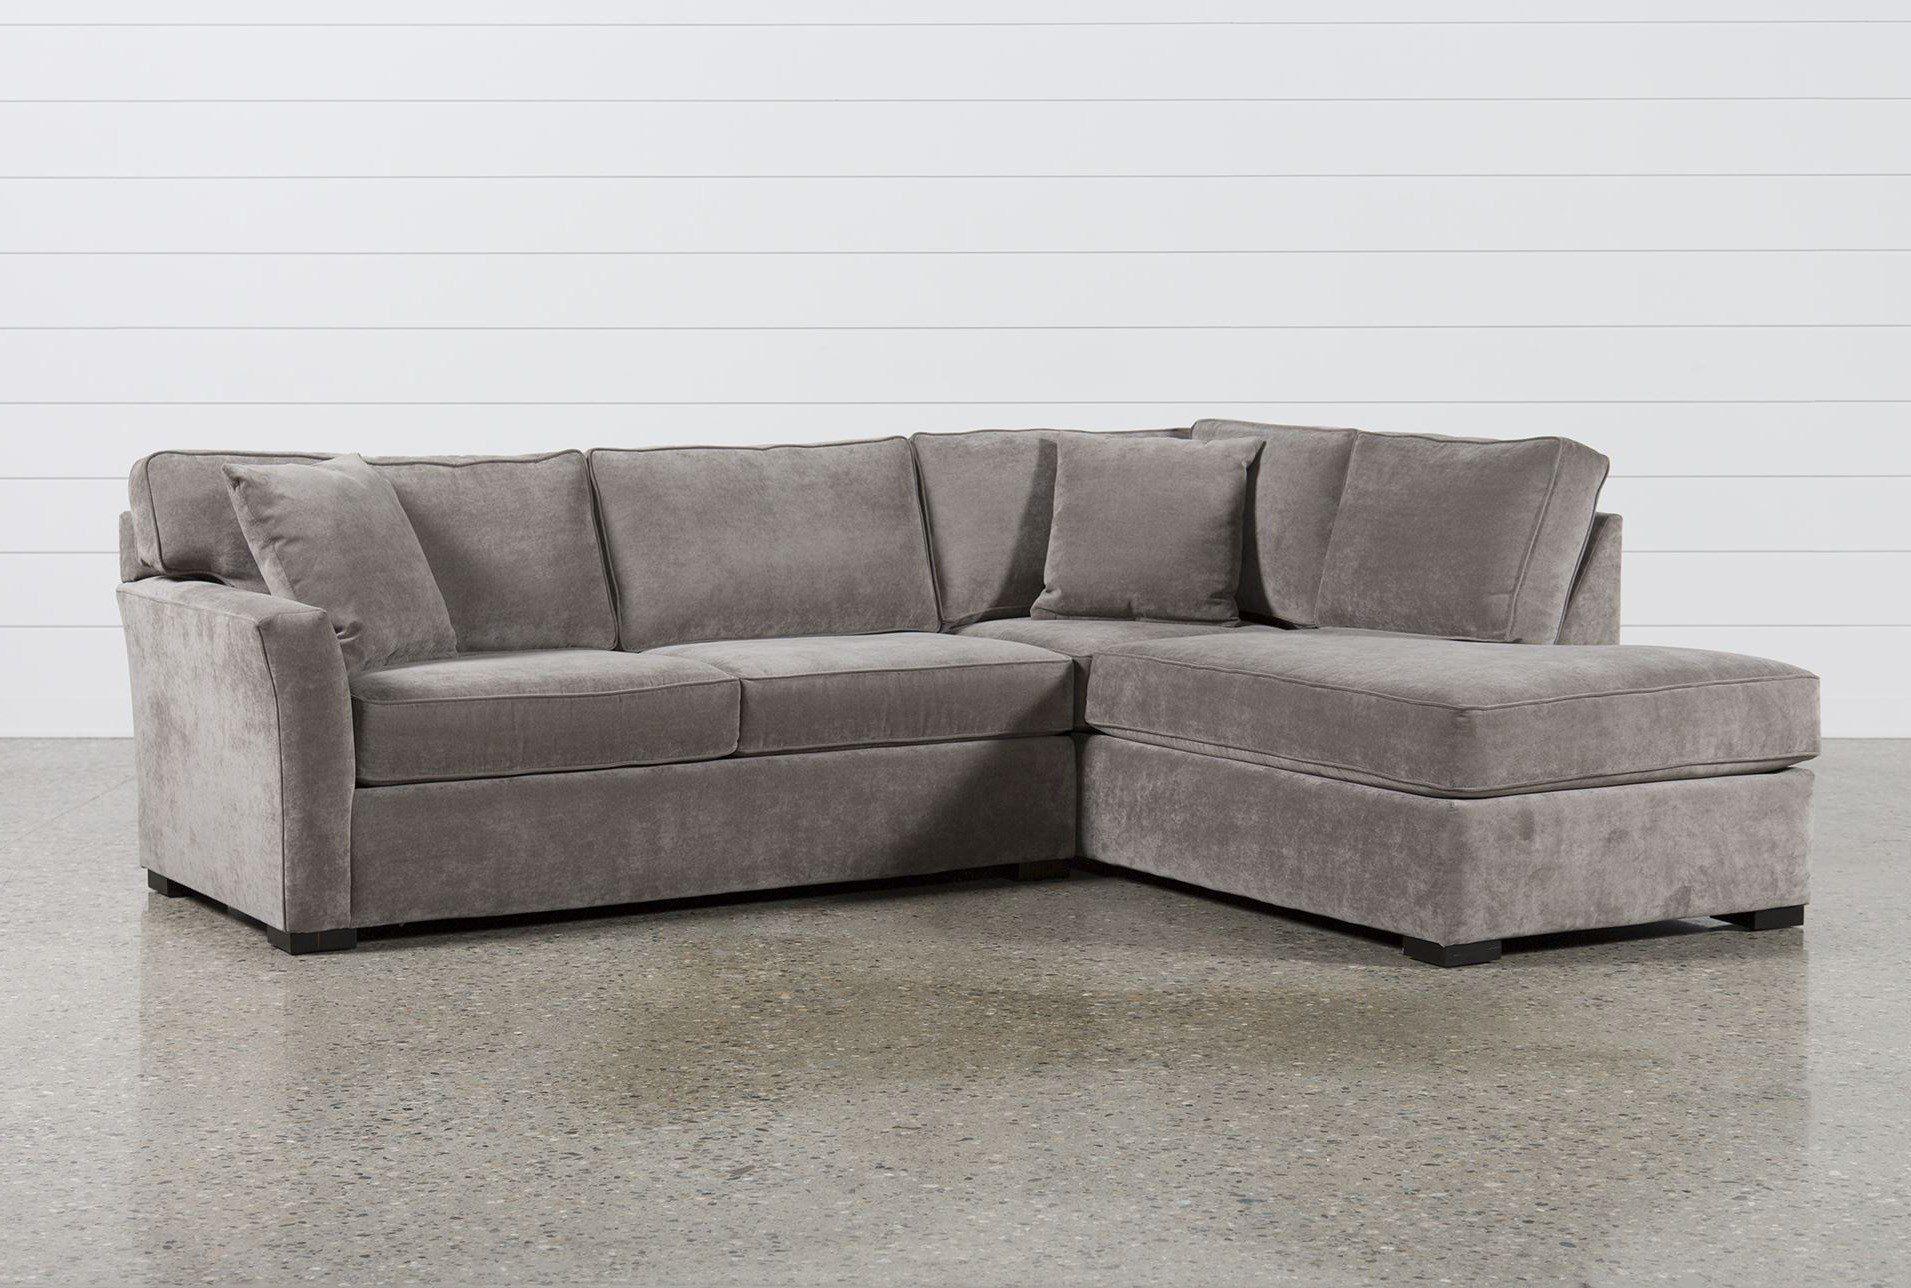 paulin reversible chaise sofa bed sleeper sectional review